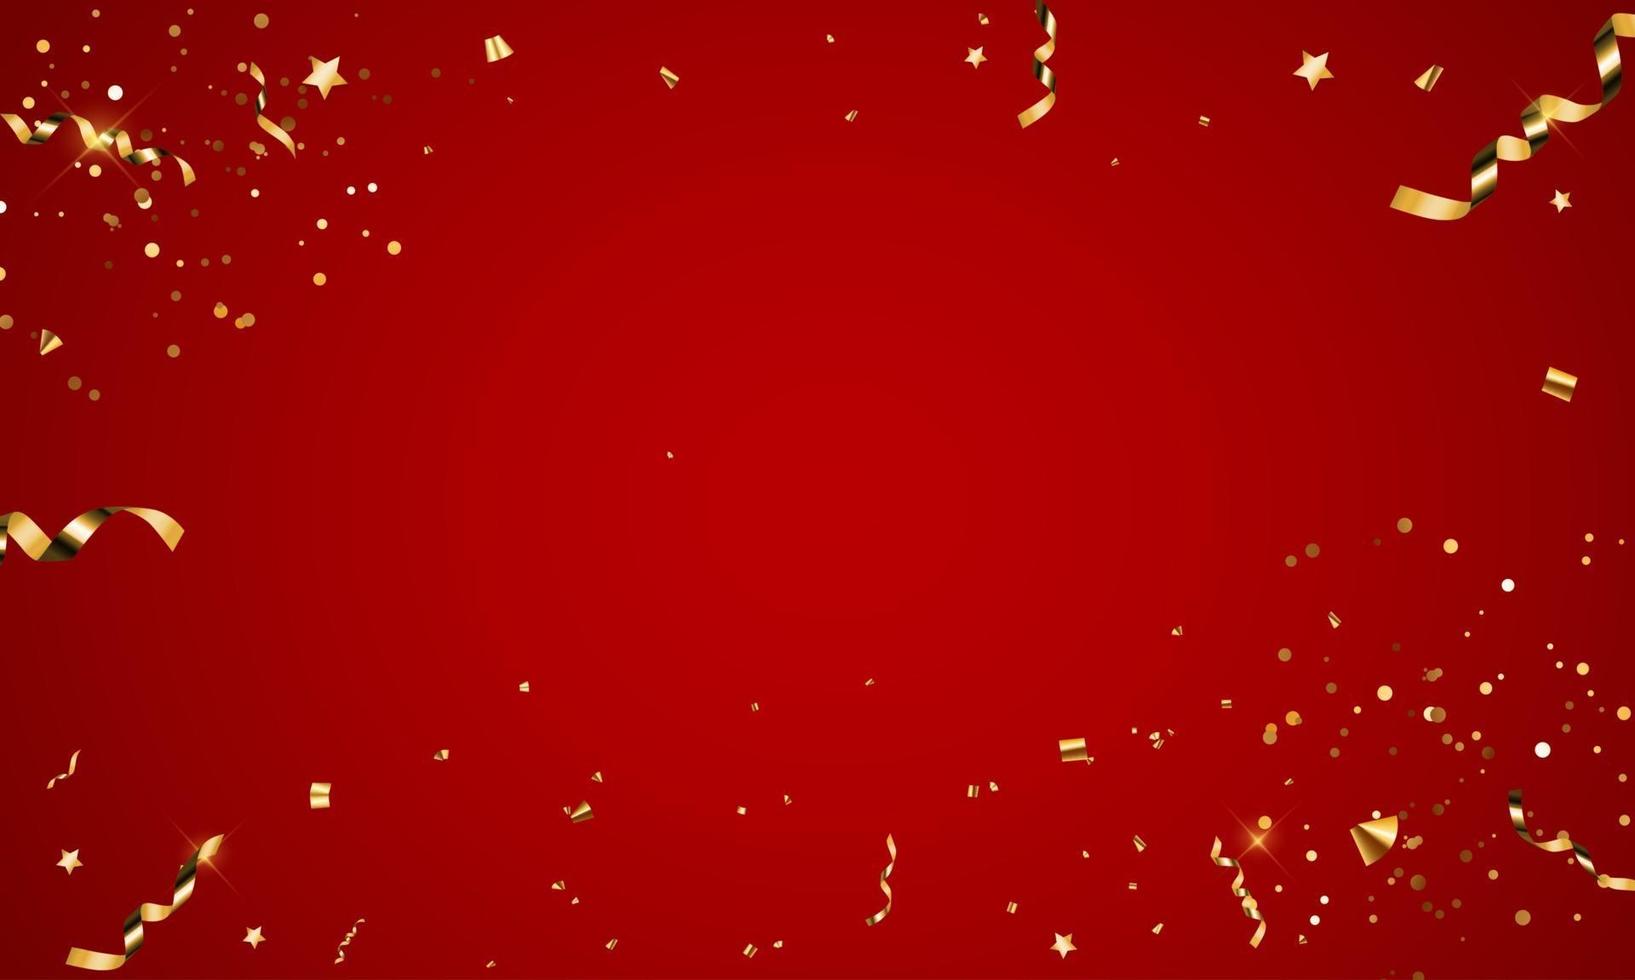 Abstract Red Party Holiday Background with Confetti and Golden Ribbon vector